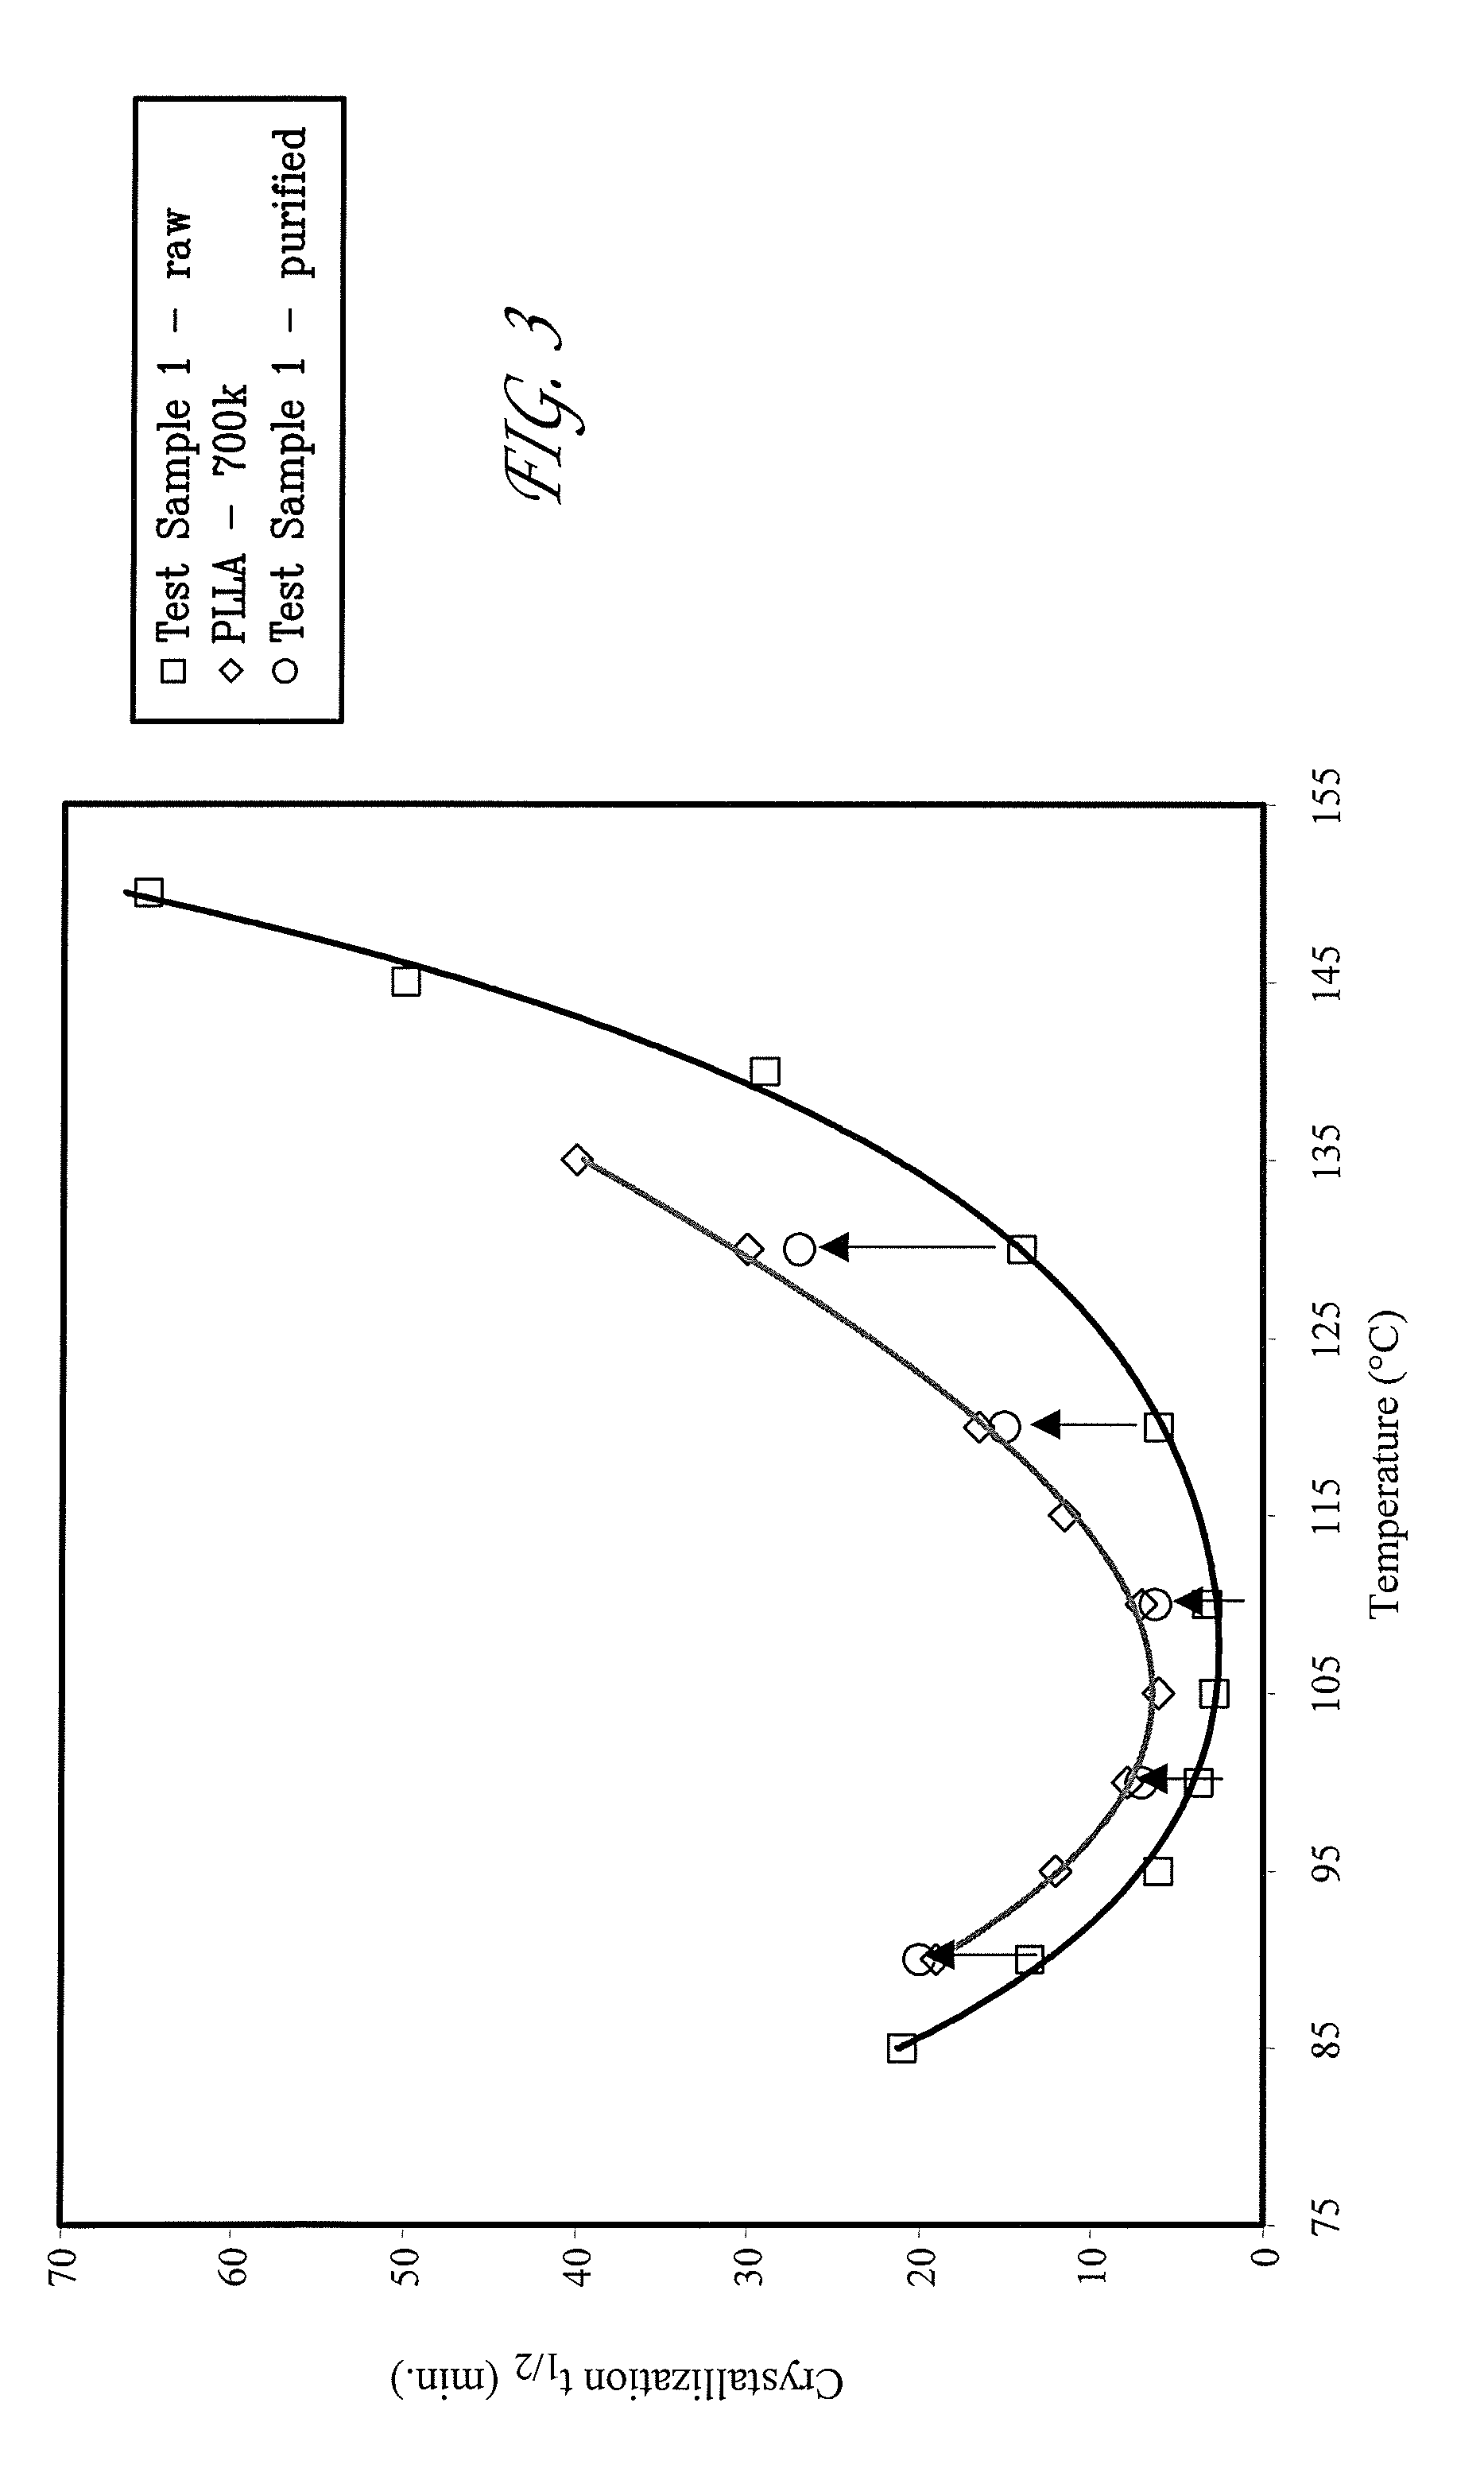 Bioabsorbable polymer compositions exhibiting enhanced crystallization and hydrolysis rates